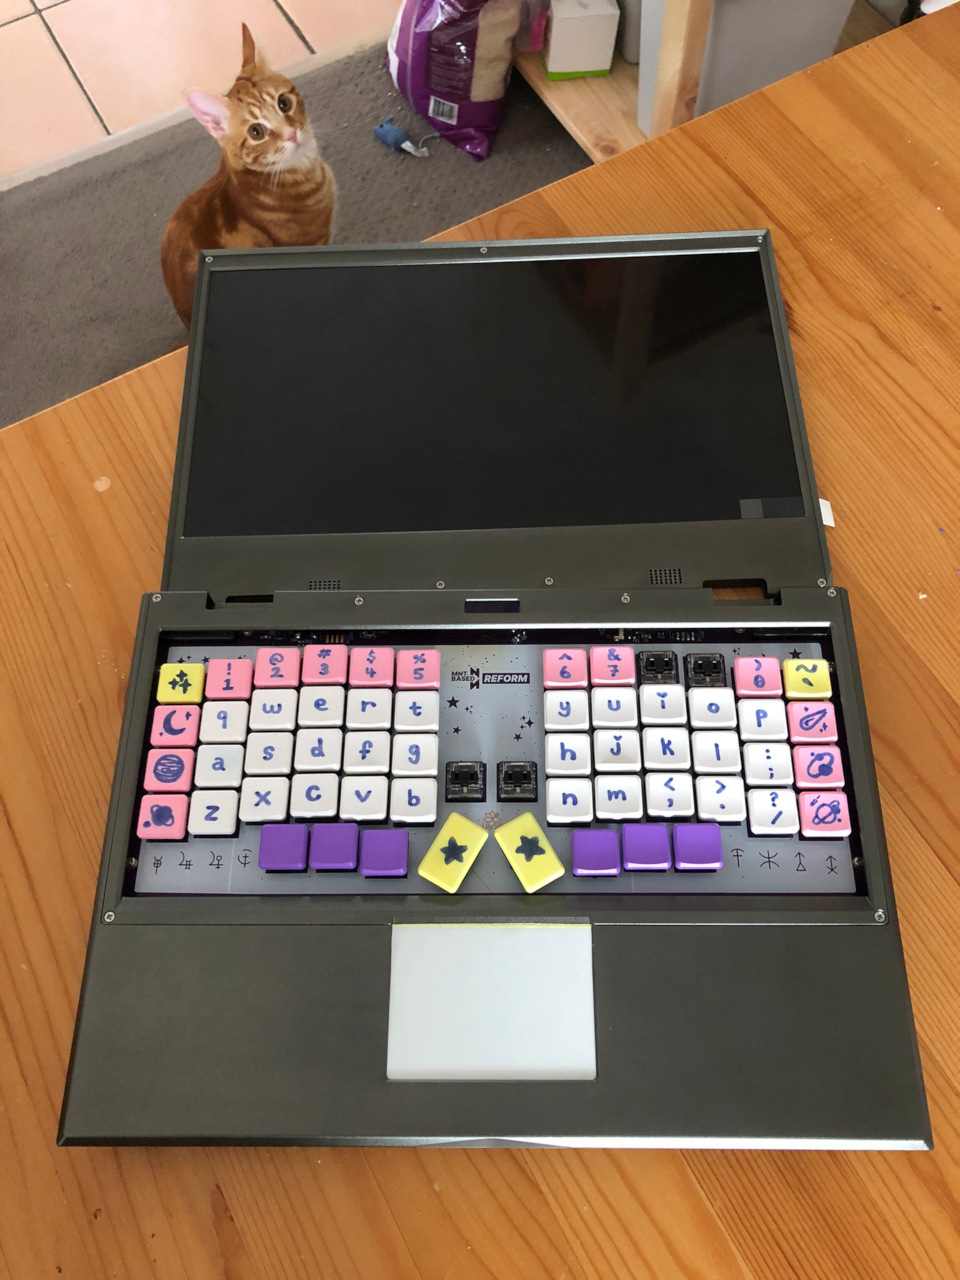 Pic: Test fit of the keyboard in the case